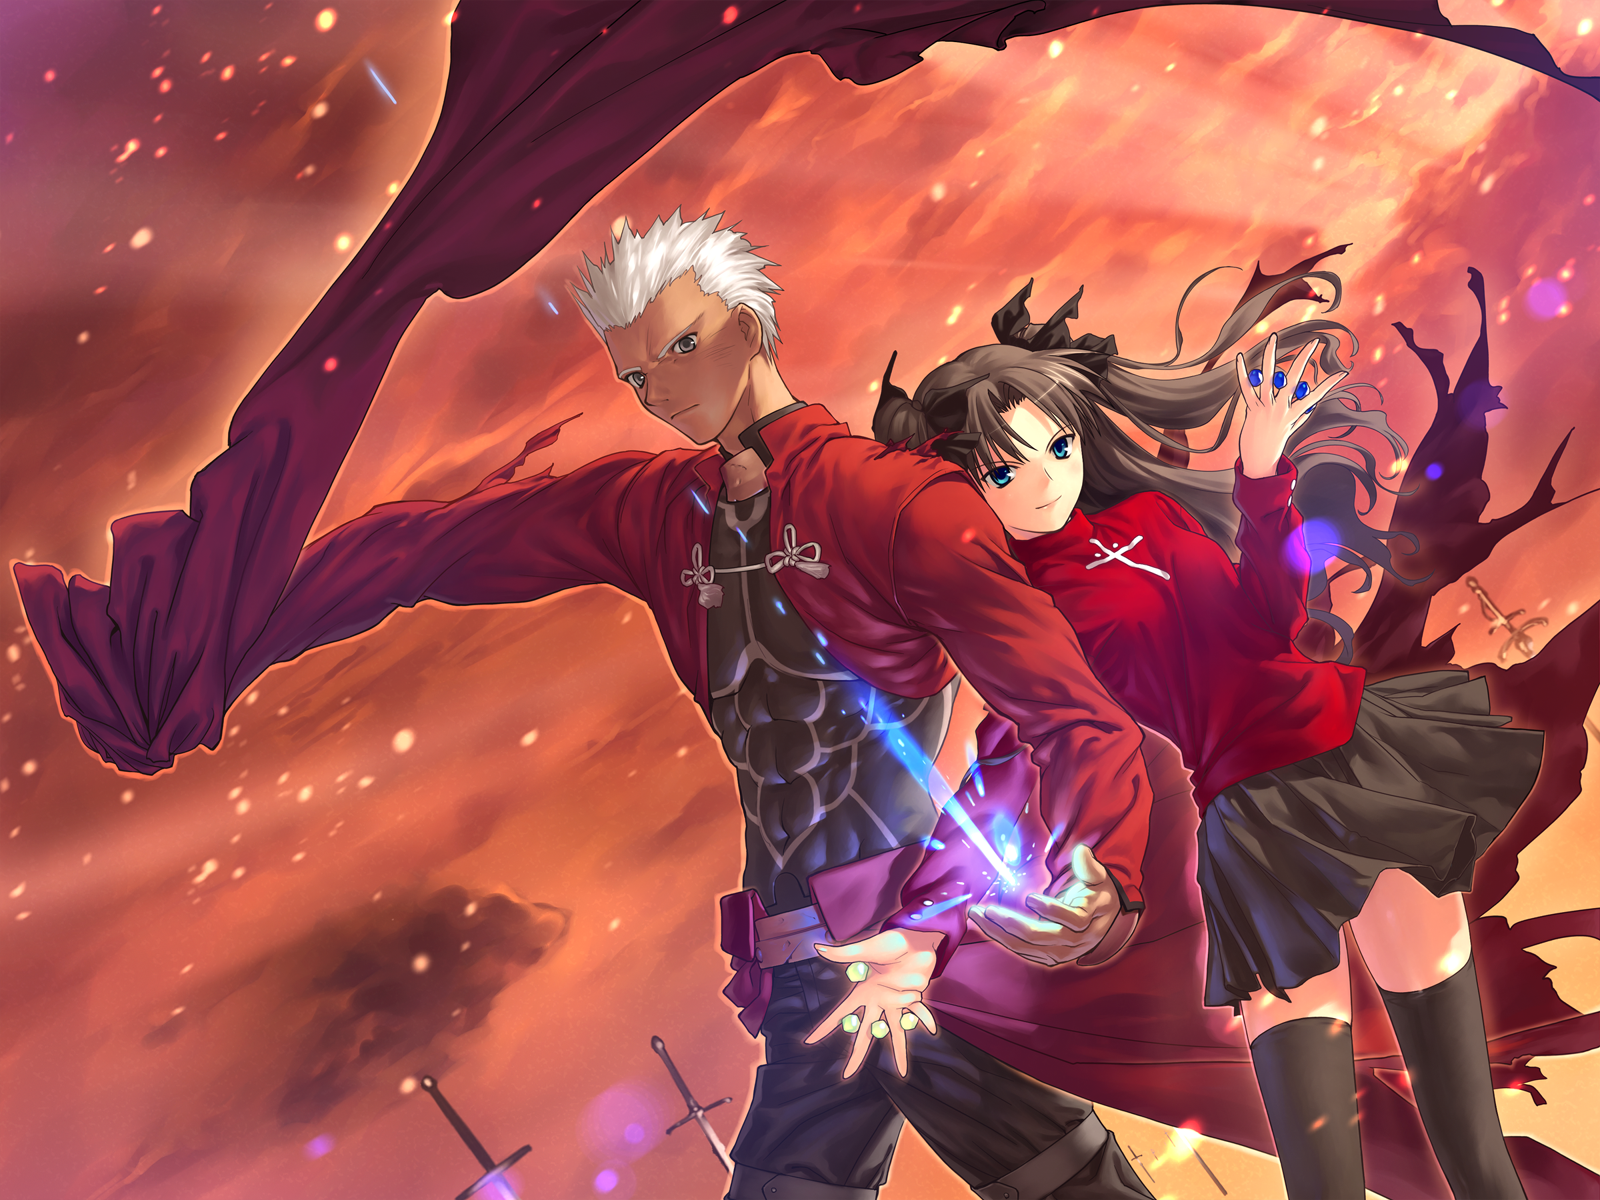 Fate/Stay Night Anime Characters Rin Tohsaka and Archer in a captivating scene.